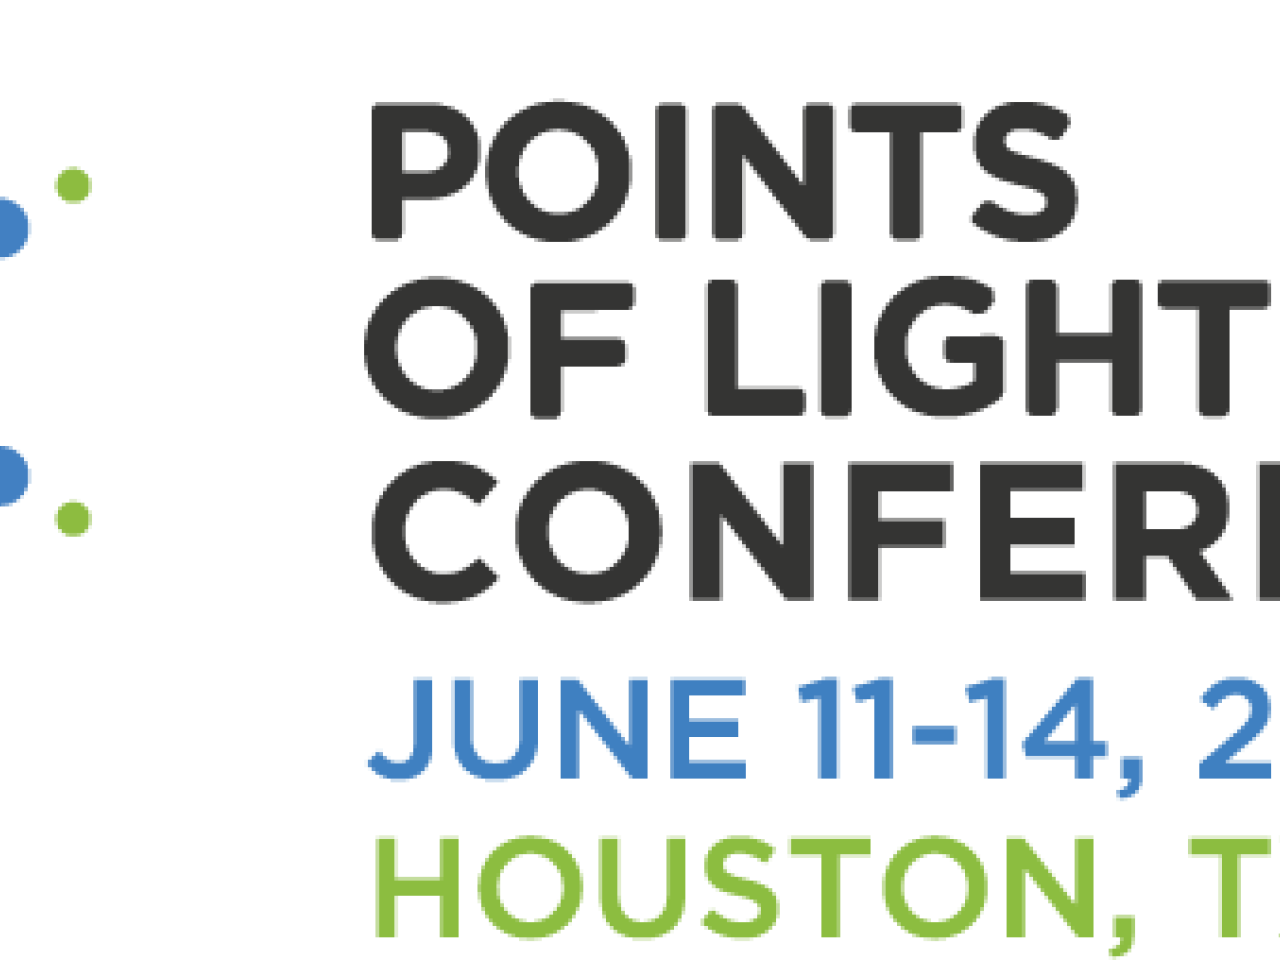 Points of Light Conference Logo